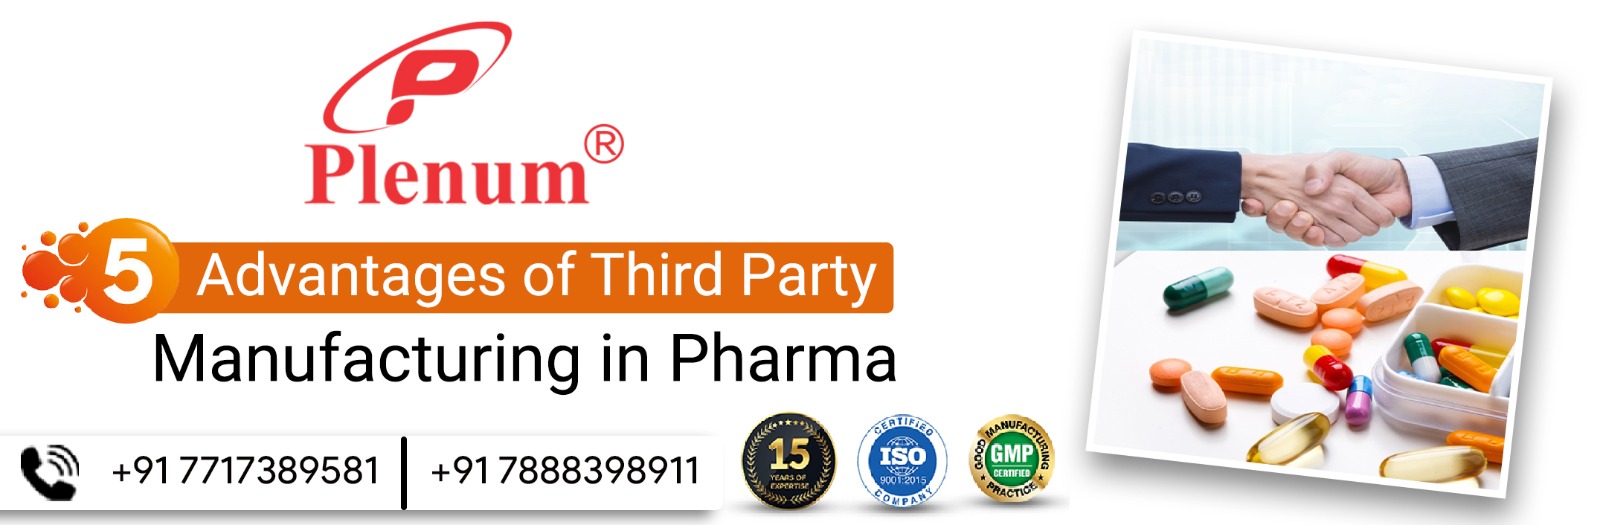 Advantages of Third Party Manufacturing Pharma Company | Plenum Biotech